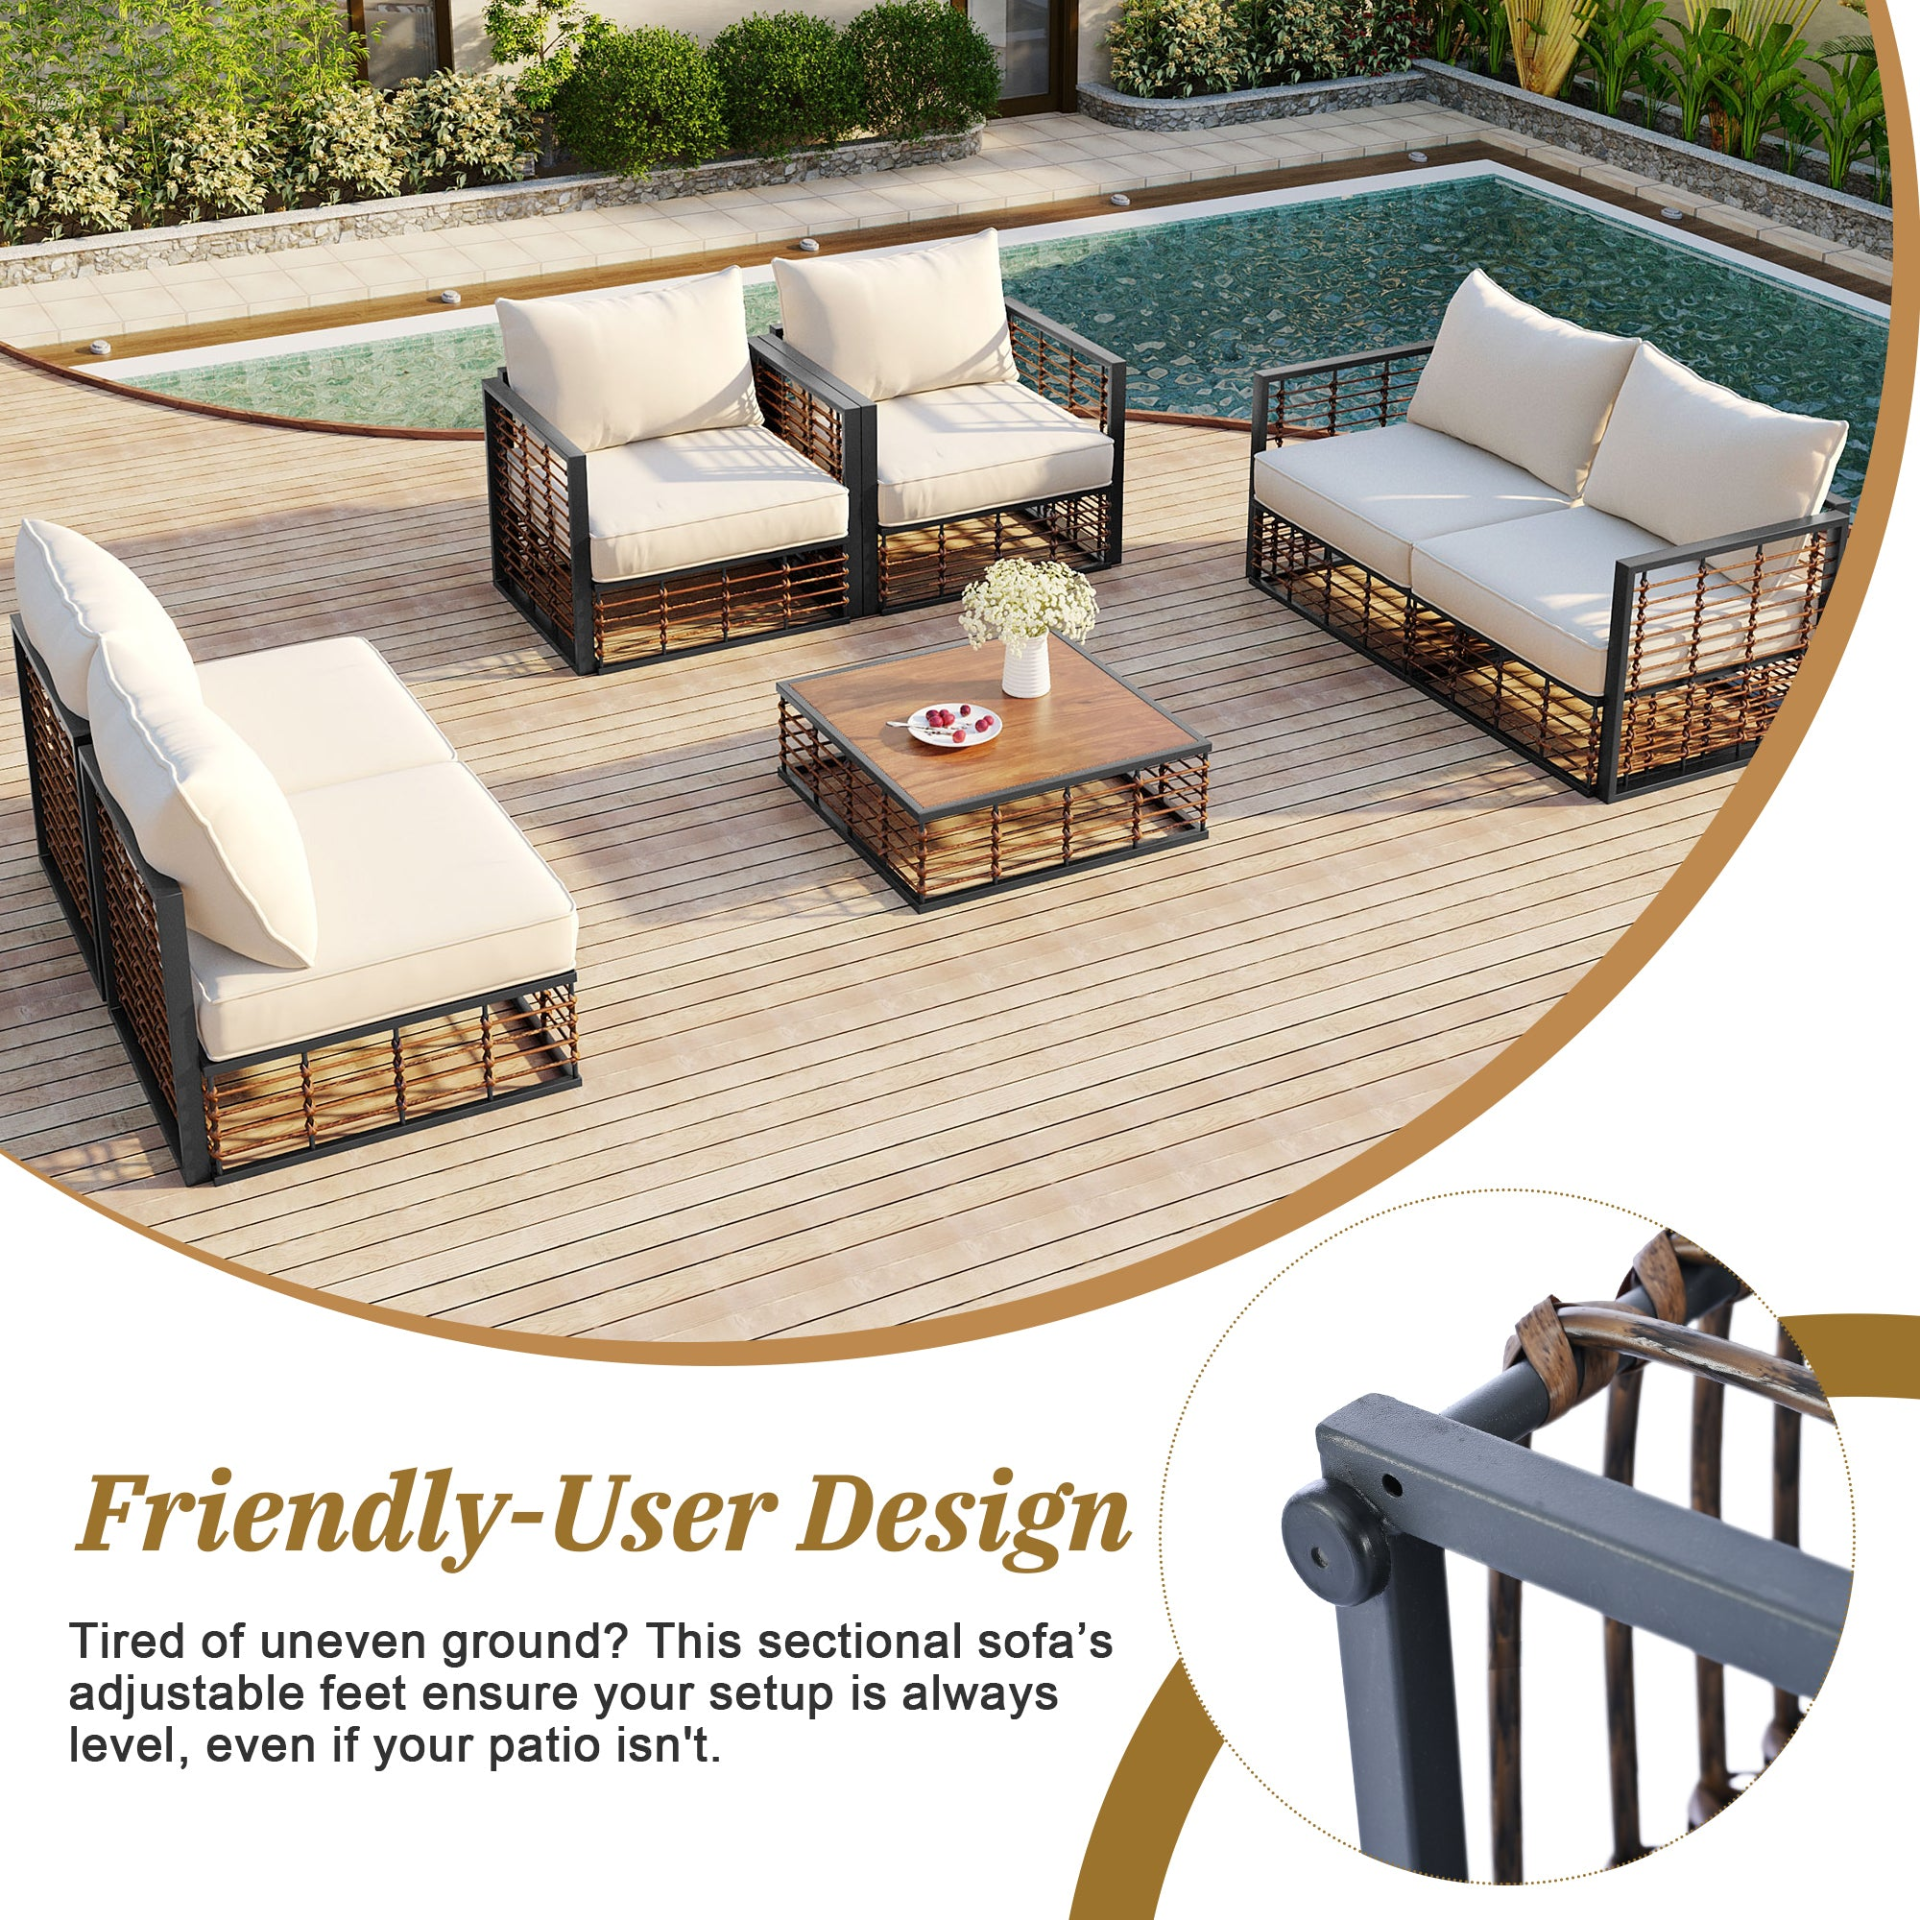 Modern Minimalist 7-Piece Metal Patio Sectional Sofa Set, All-Weather Garden Conversational Furniture Set with Thick Cushions and Coffee Table for Indoor Outdoor, Gray Môdern Space Gallery